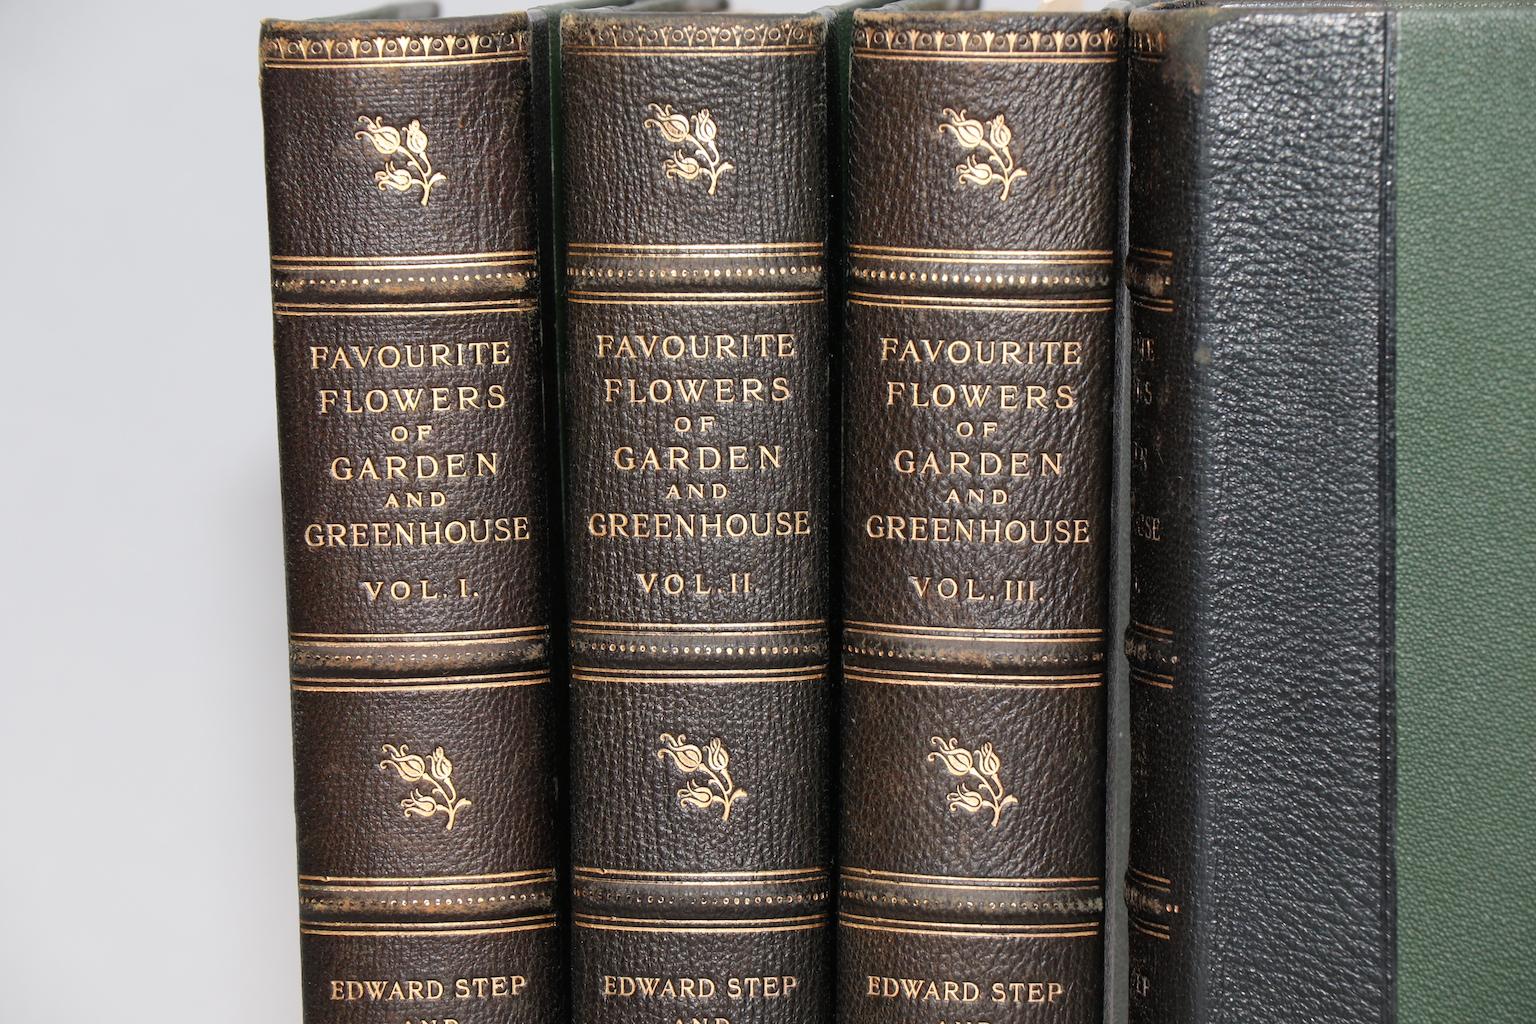 Leatherbound. Four volumes. Bound in three quarter green morocco with top edges gilt, raised bands, and gilt panels. Illustrated with 300 hand-colored plates by D. Bois. Very good. Published in London by Frederick Warne & Co. in 1896.

Botanicals,